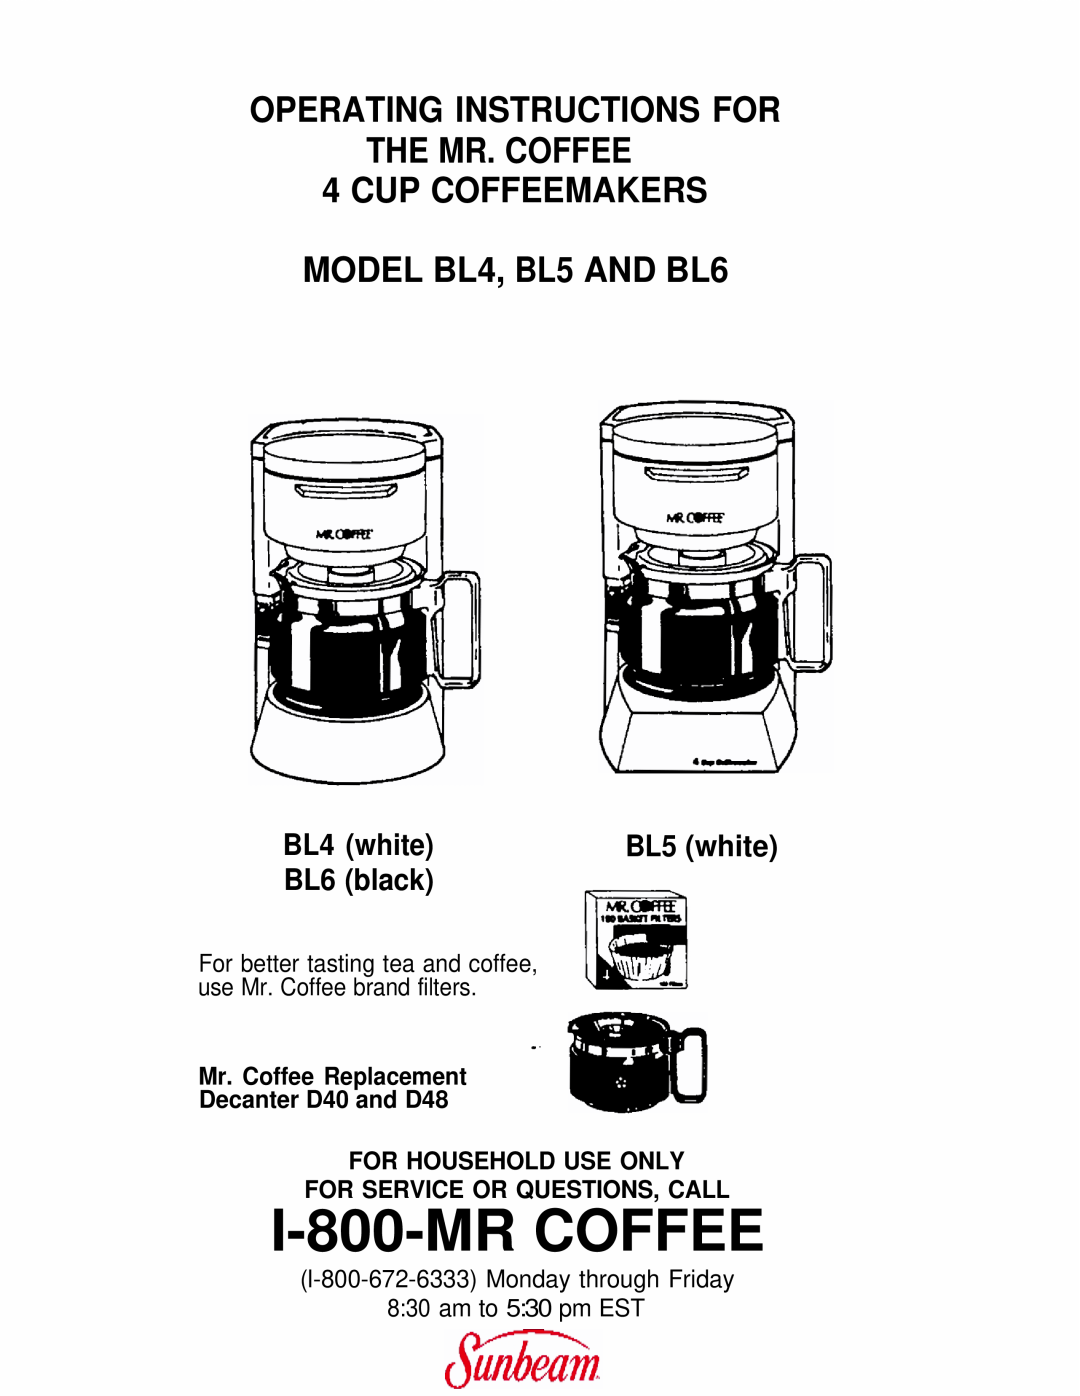 Mr. Coffee manual I-800-MR COFFEE, OPERATING INSTRUCTIONS FOR THE MR. COFFEE 4 CUP COFFEEMAKERS, BL6 black, BL4 white 